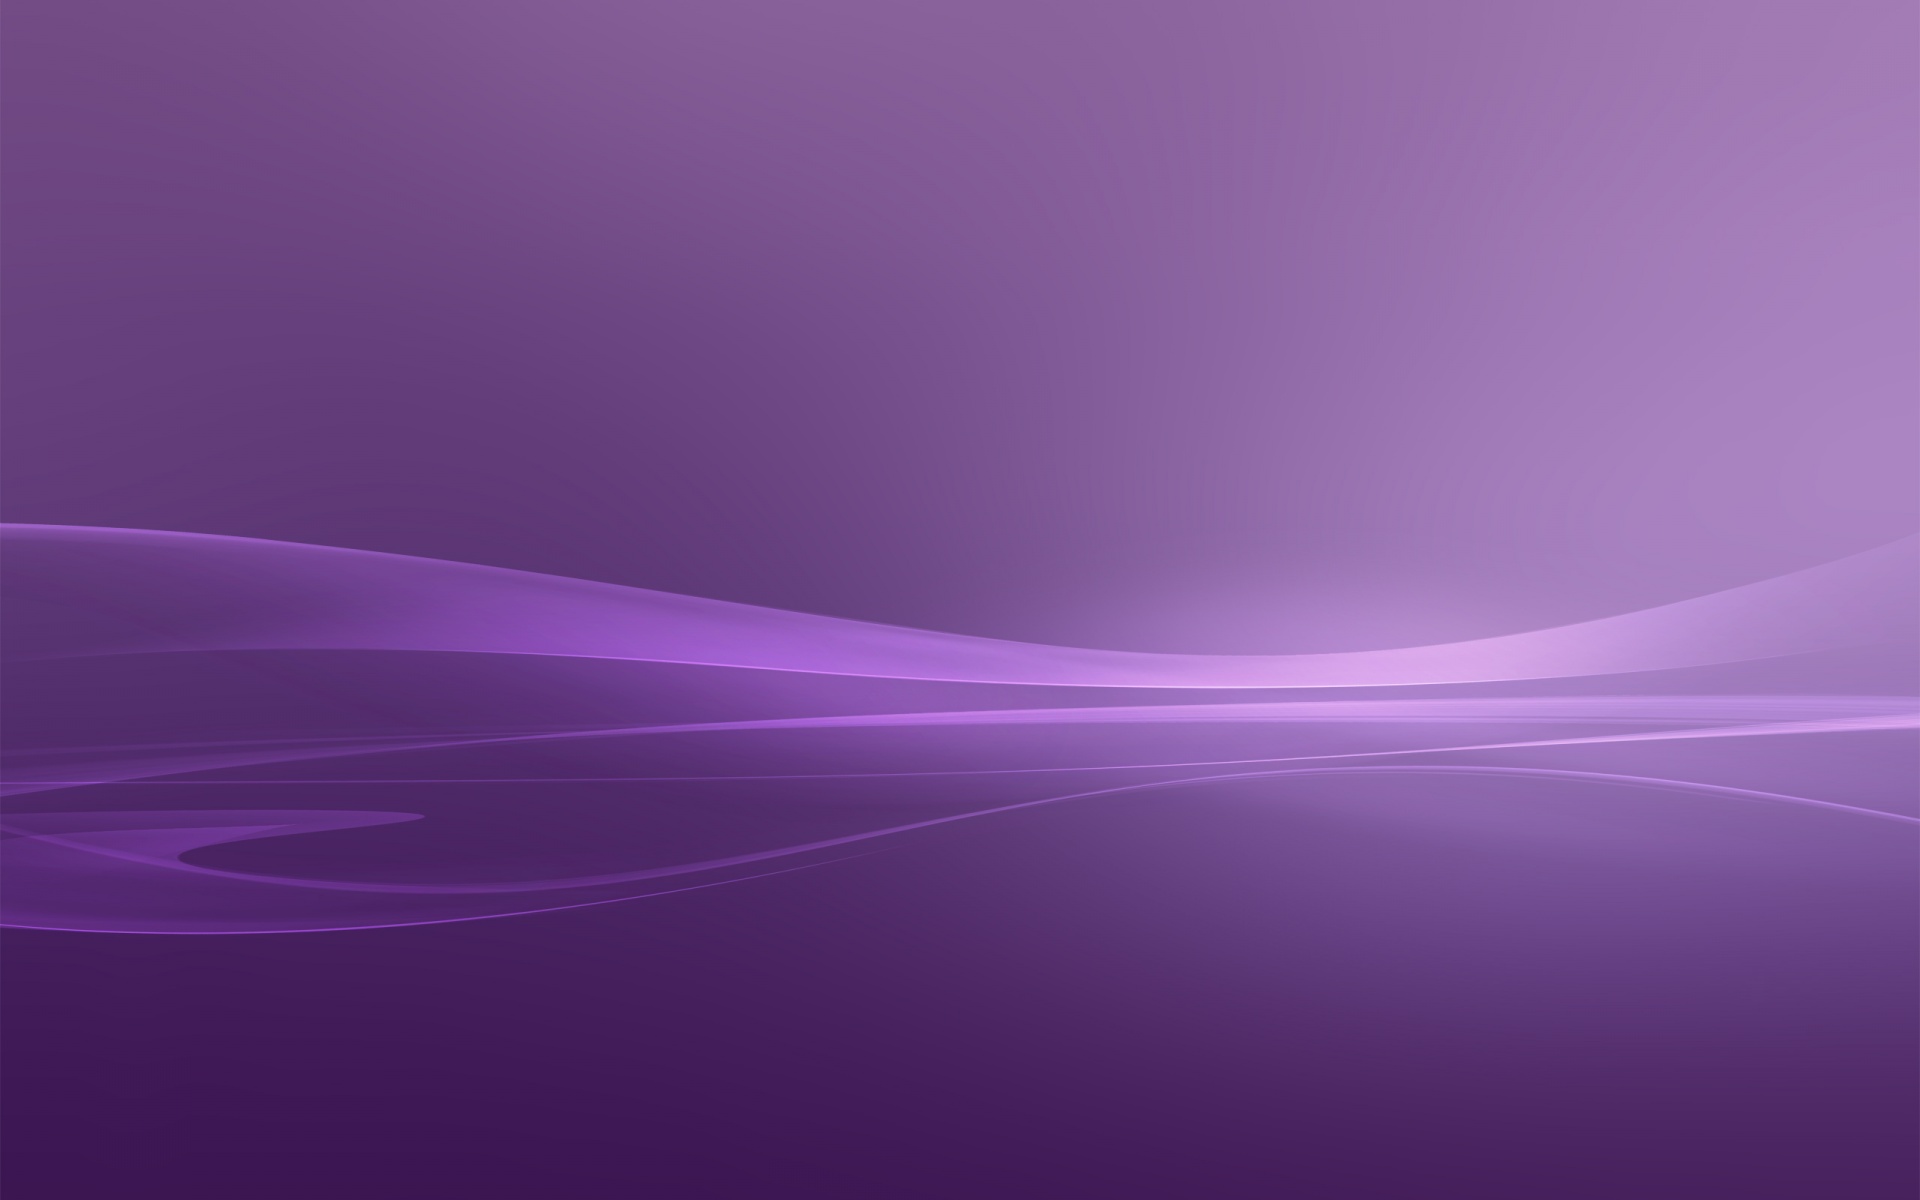 43 HD Purple Wallpaper/Background Images To Download For Free